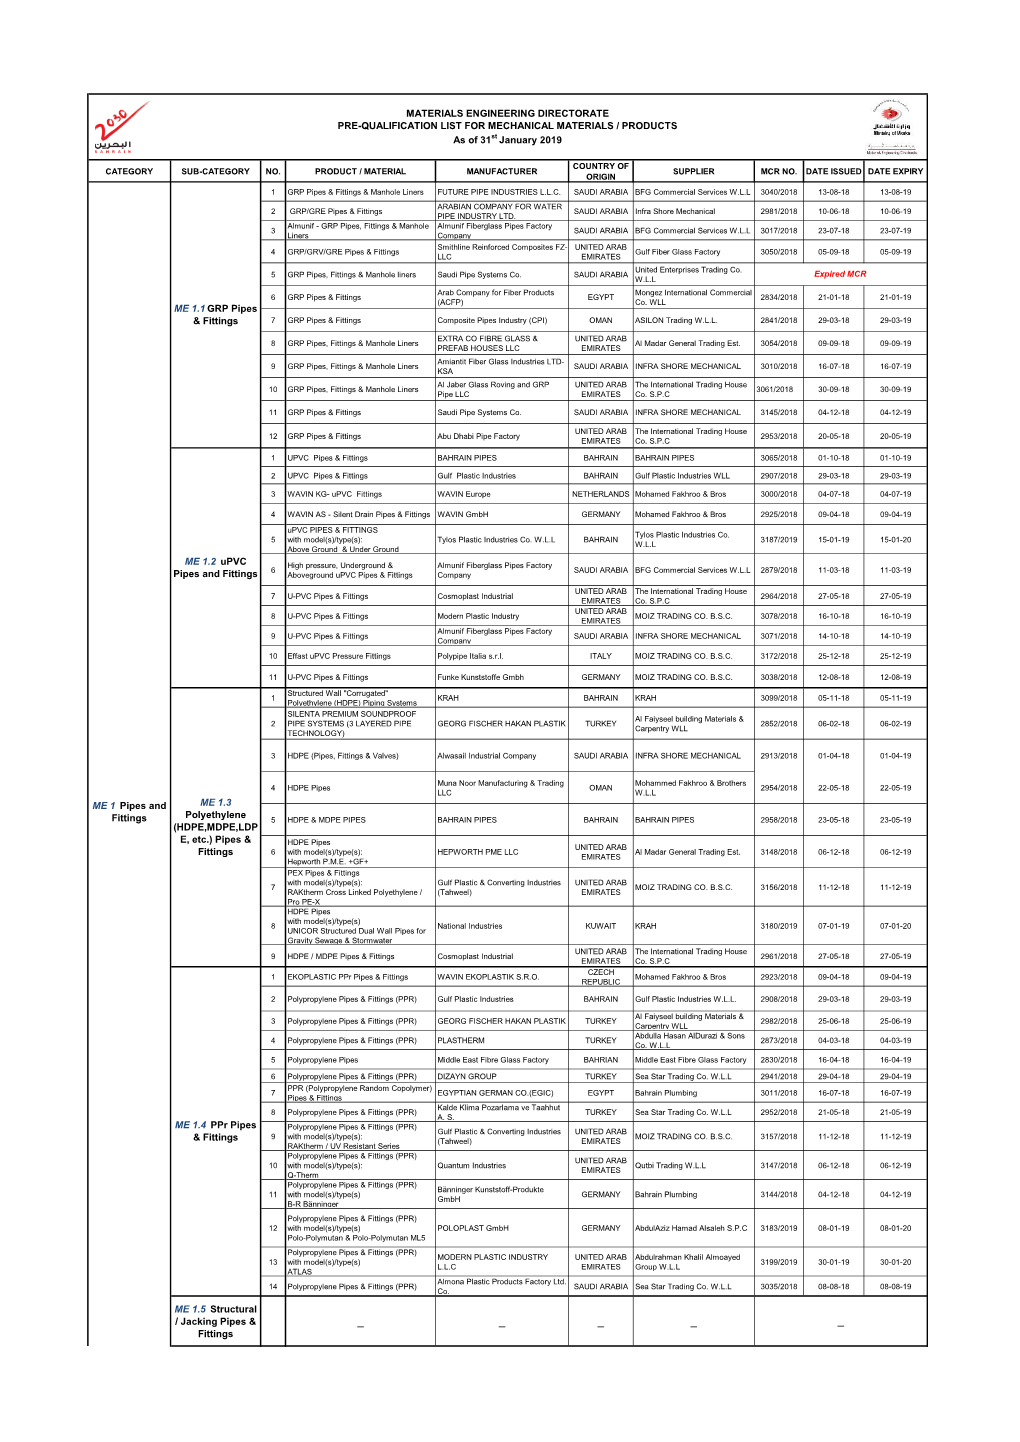 Pre-Qualification List for Mechanical Materials As of 31 January 2019.Pdf